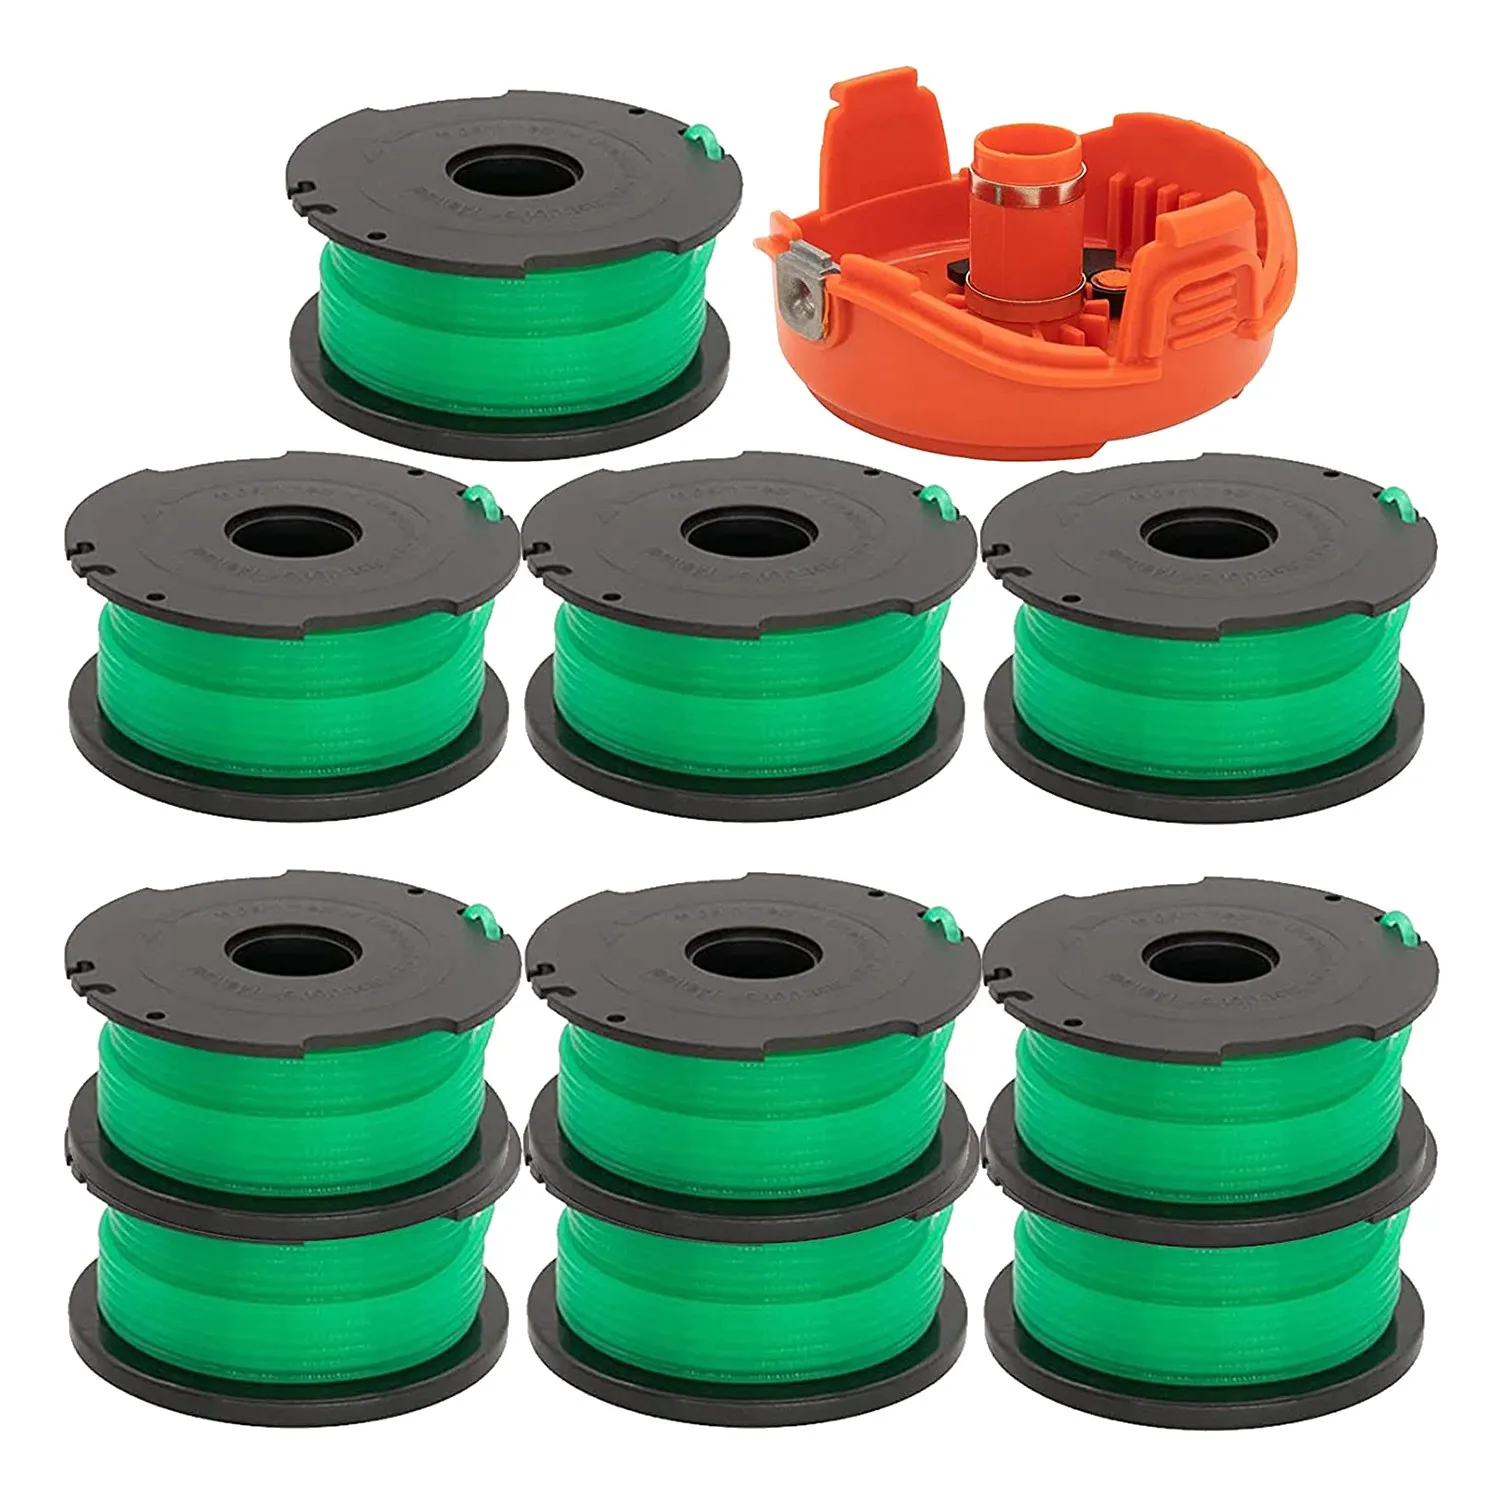 

SF-080 Replacement Spool SF-080-BKP for Black GH3000 LST540 GH3000R String Trimmer Weed Eater SF080 Auto Feed Spool